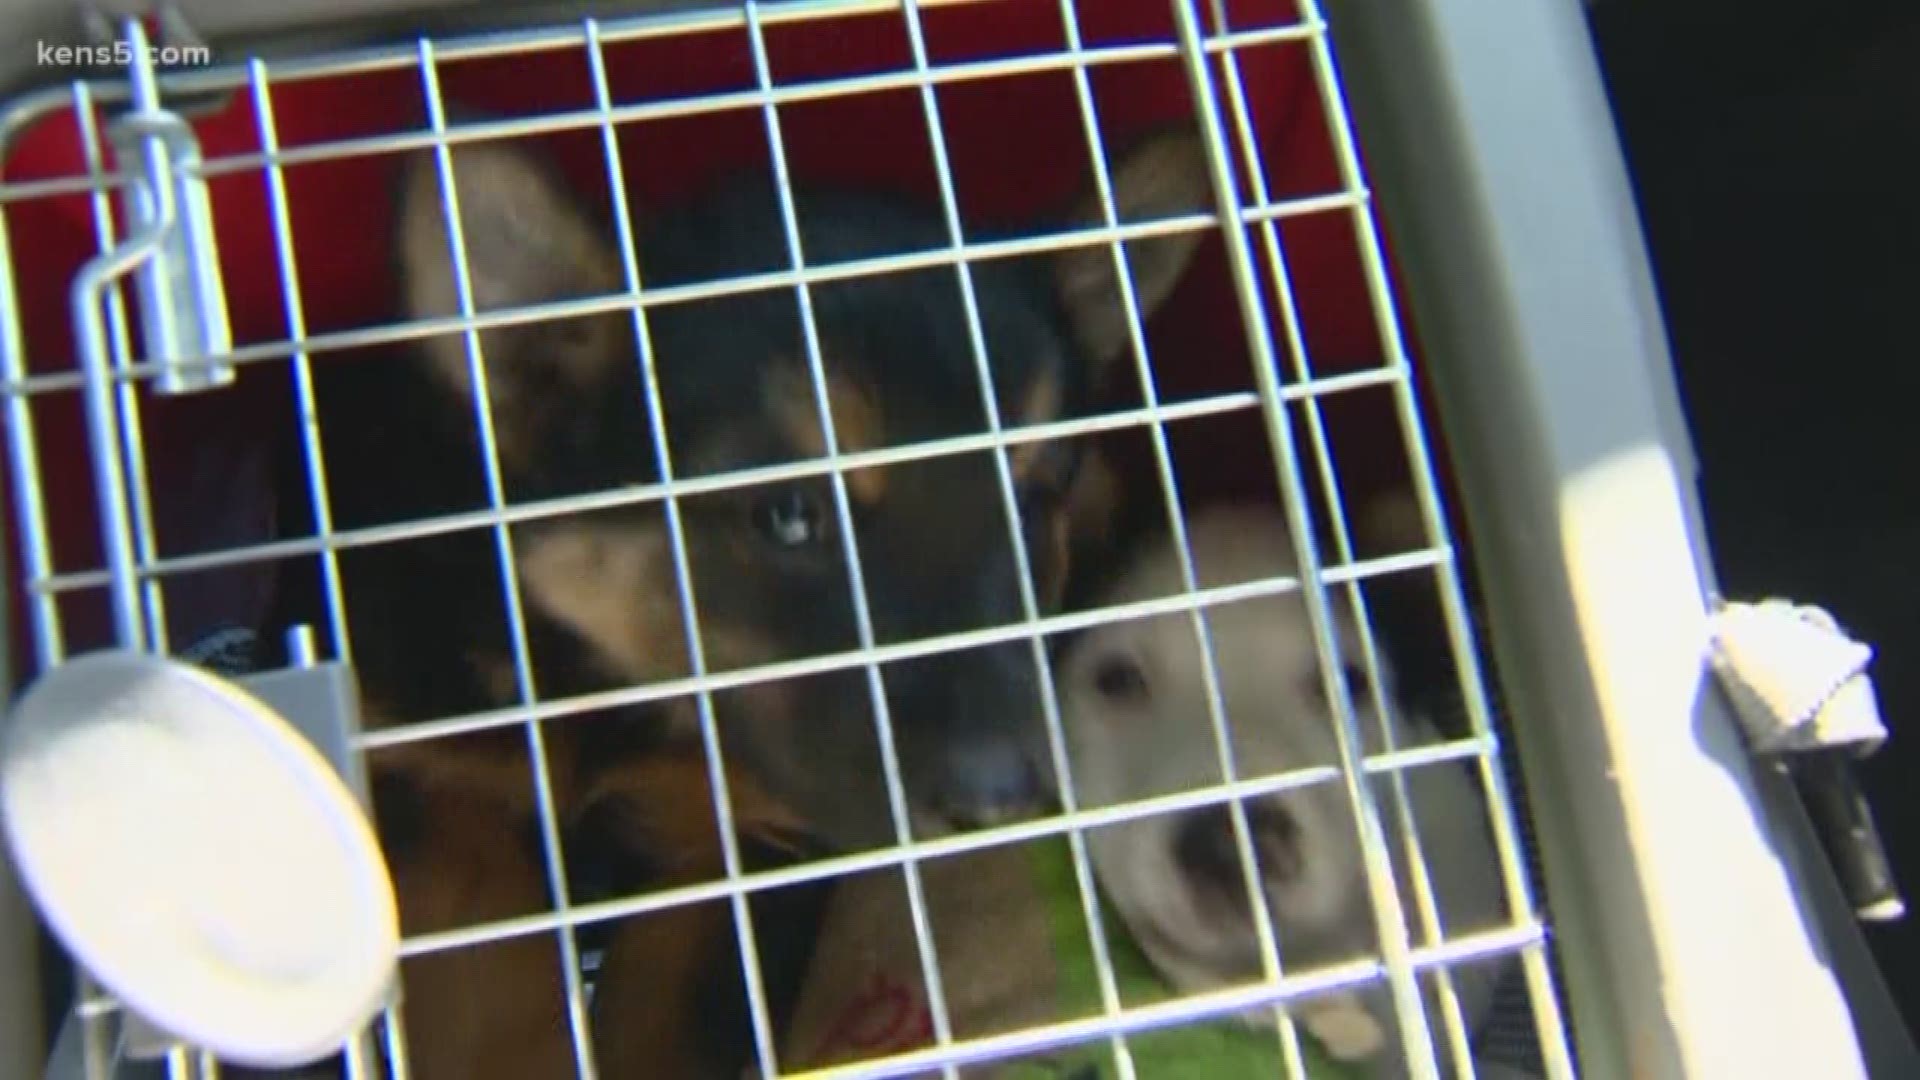 Two puppies rescued from hot car parked outside public library, owners could possibly face fine.